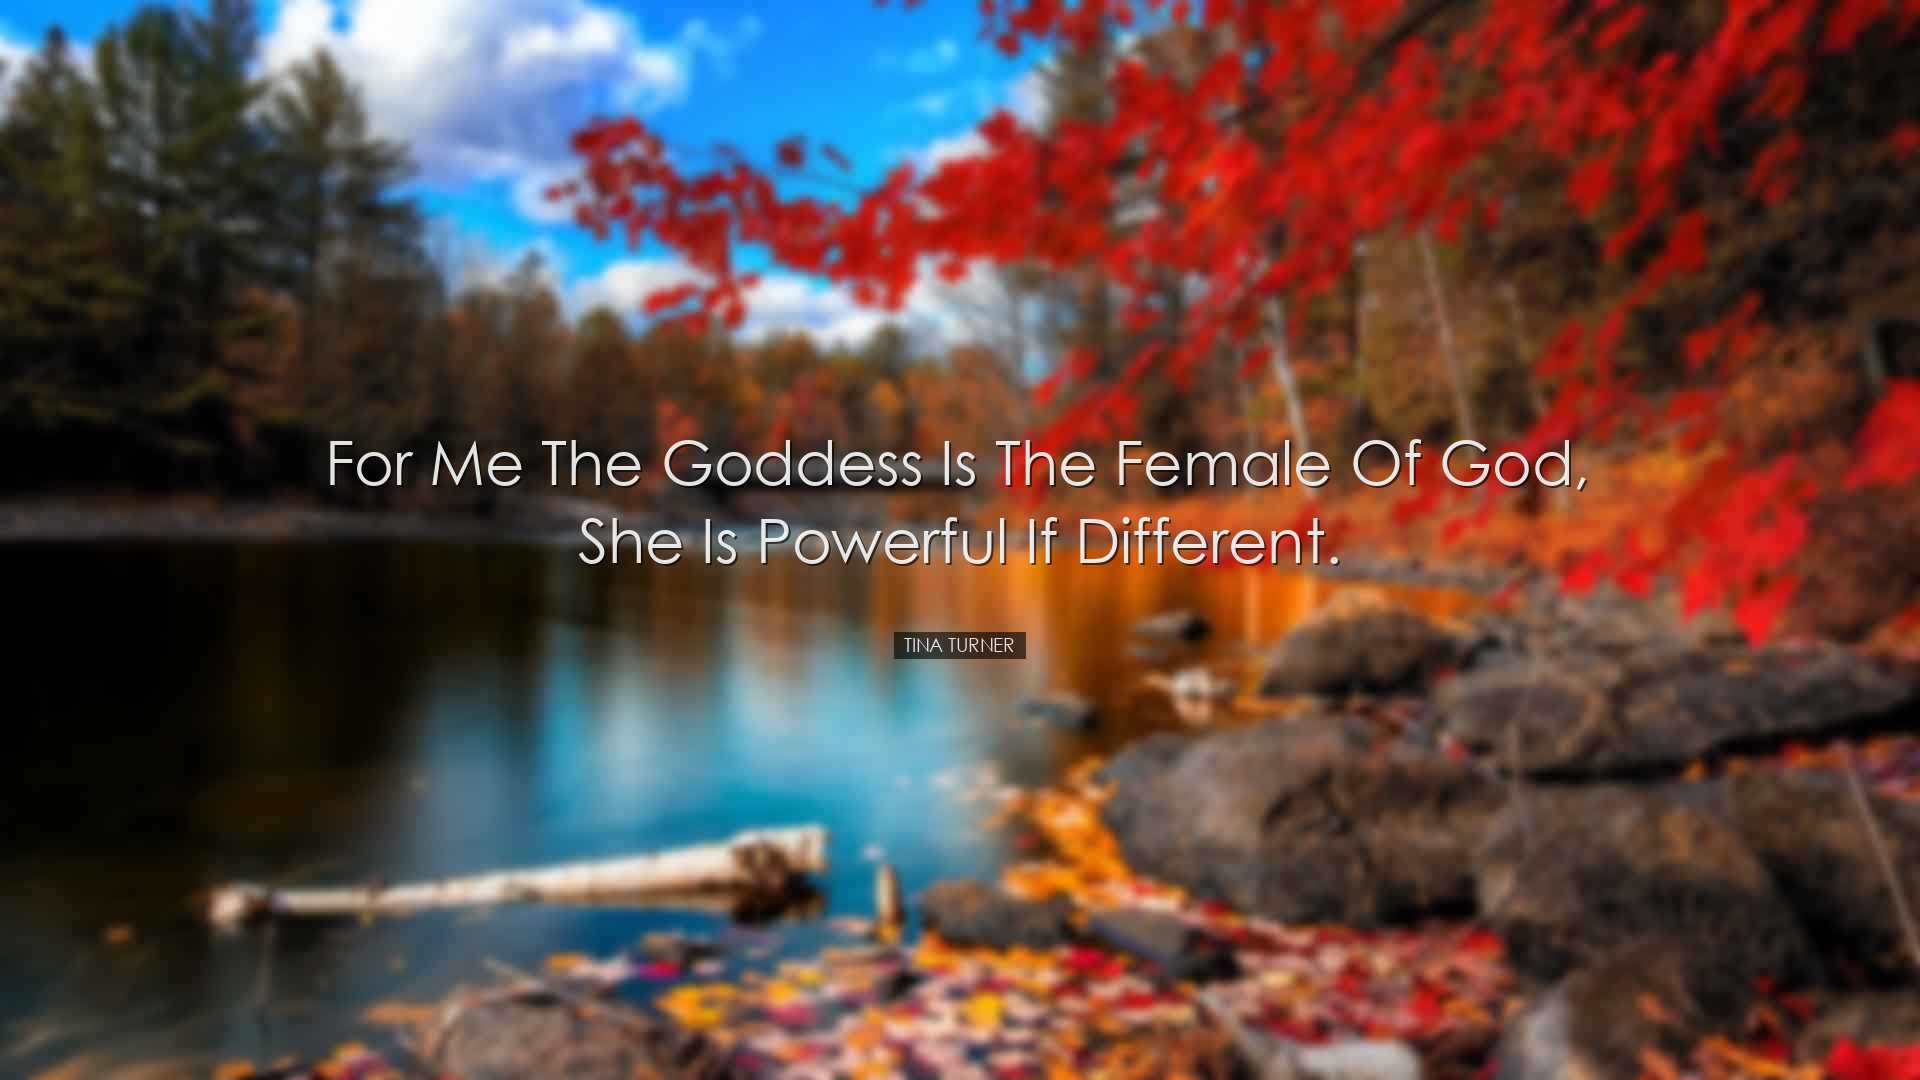 For me the goddess is the female of God, She is powerful if differ